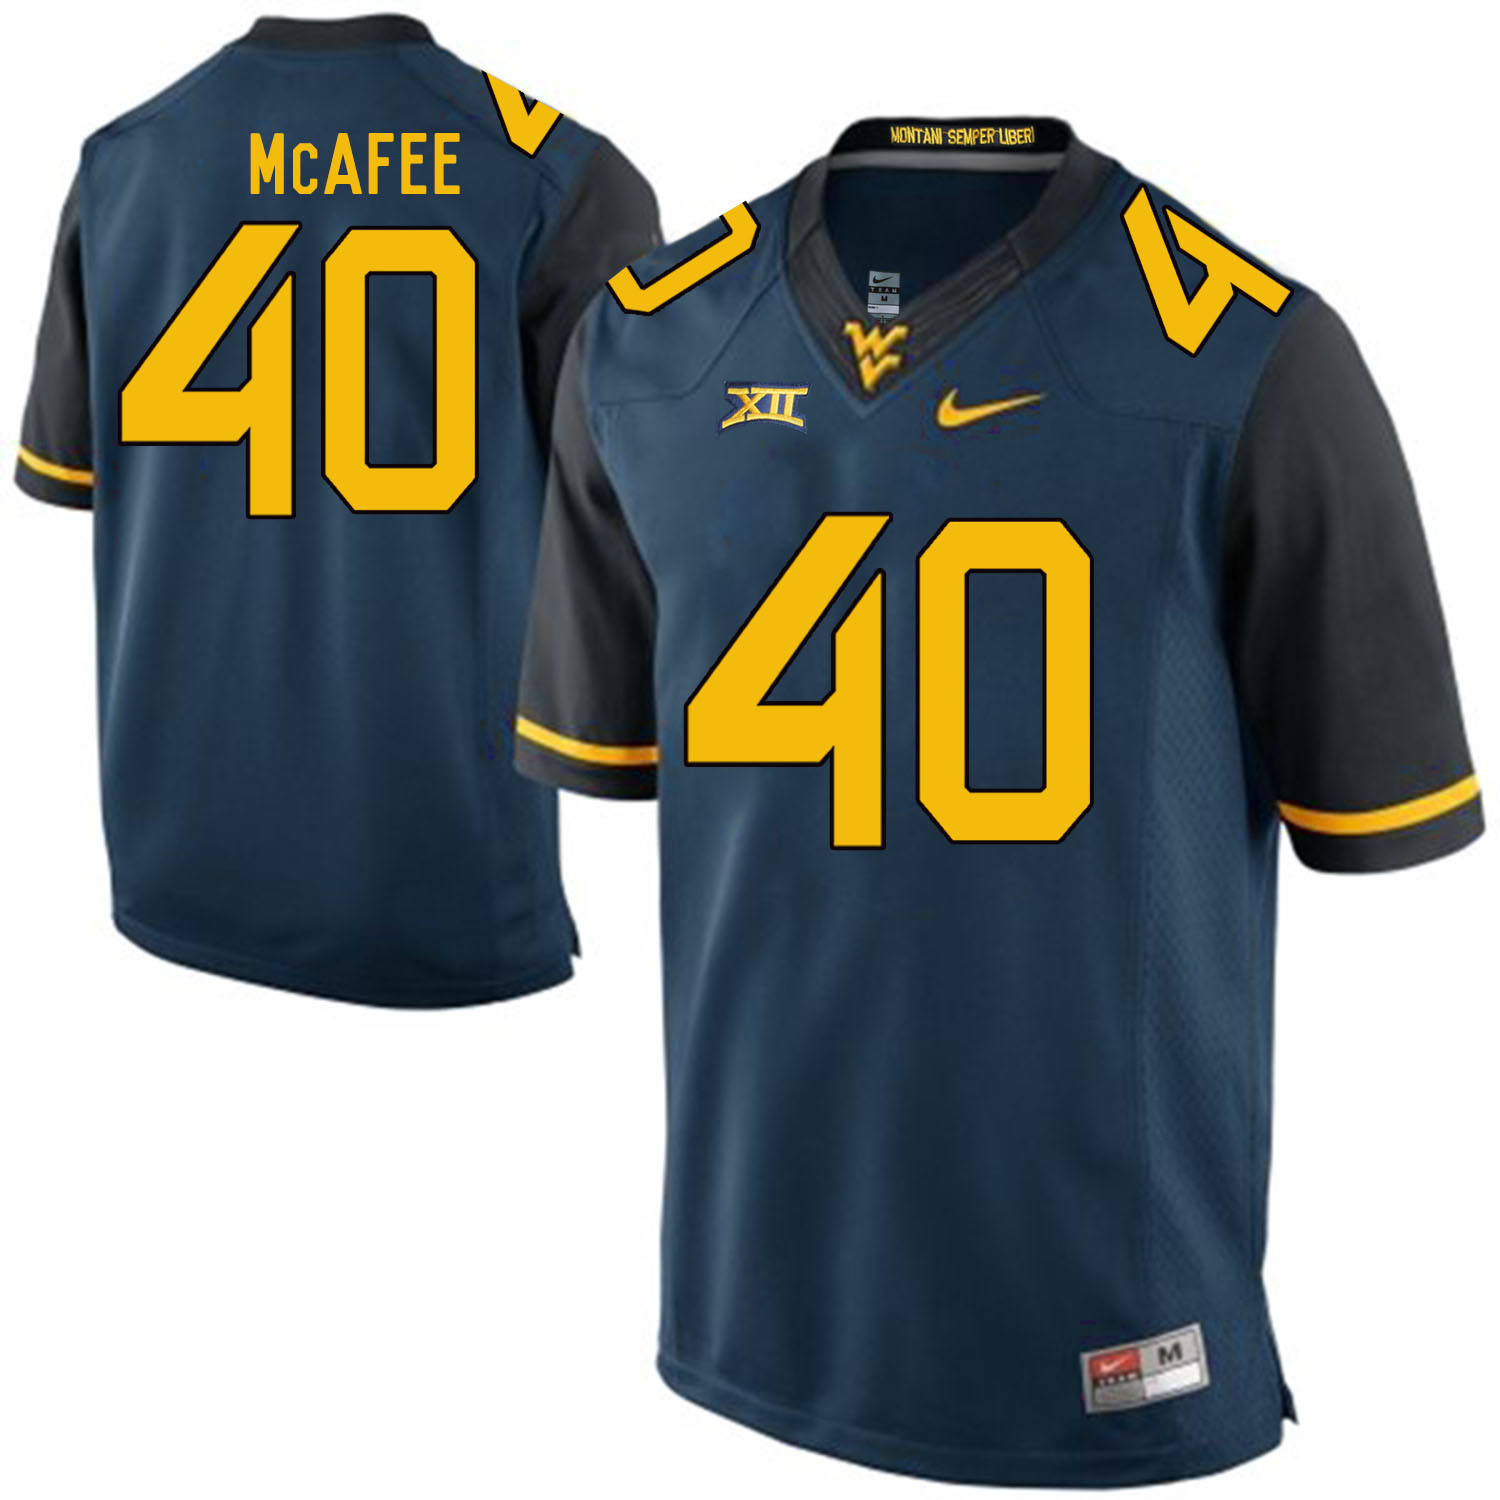 West Virginia Mountaineers 40 Pat McAfee Navy College Football Jersey